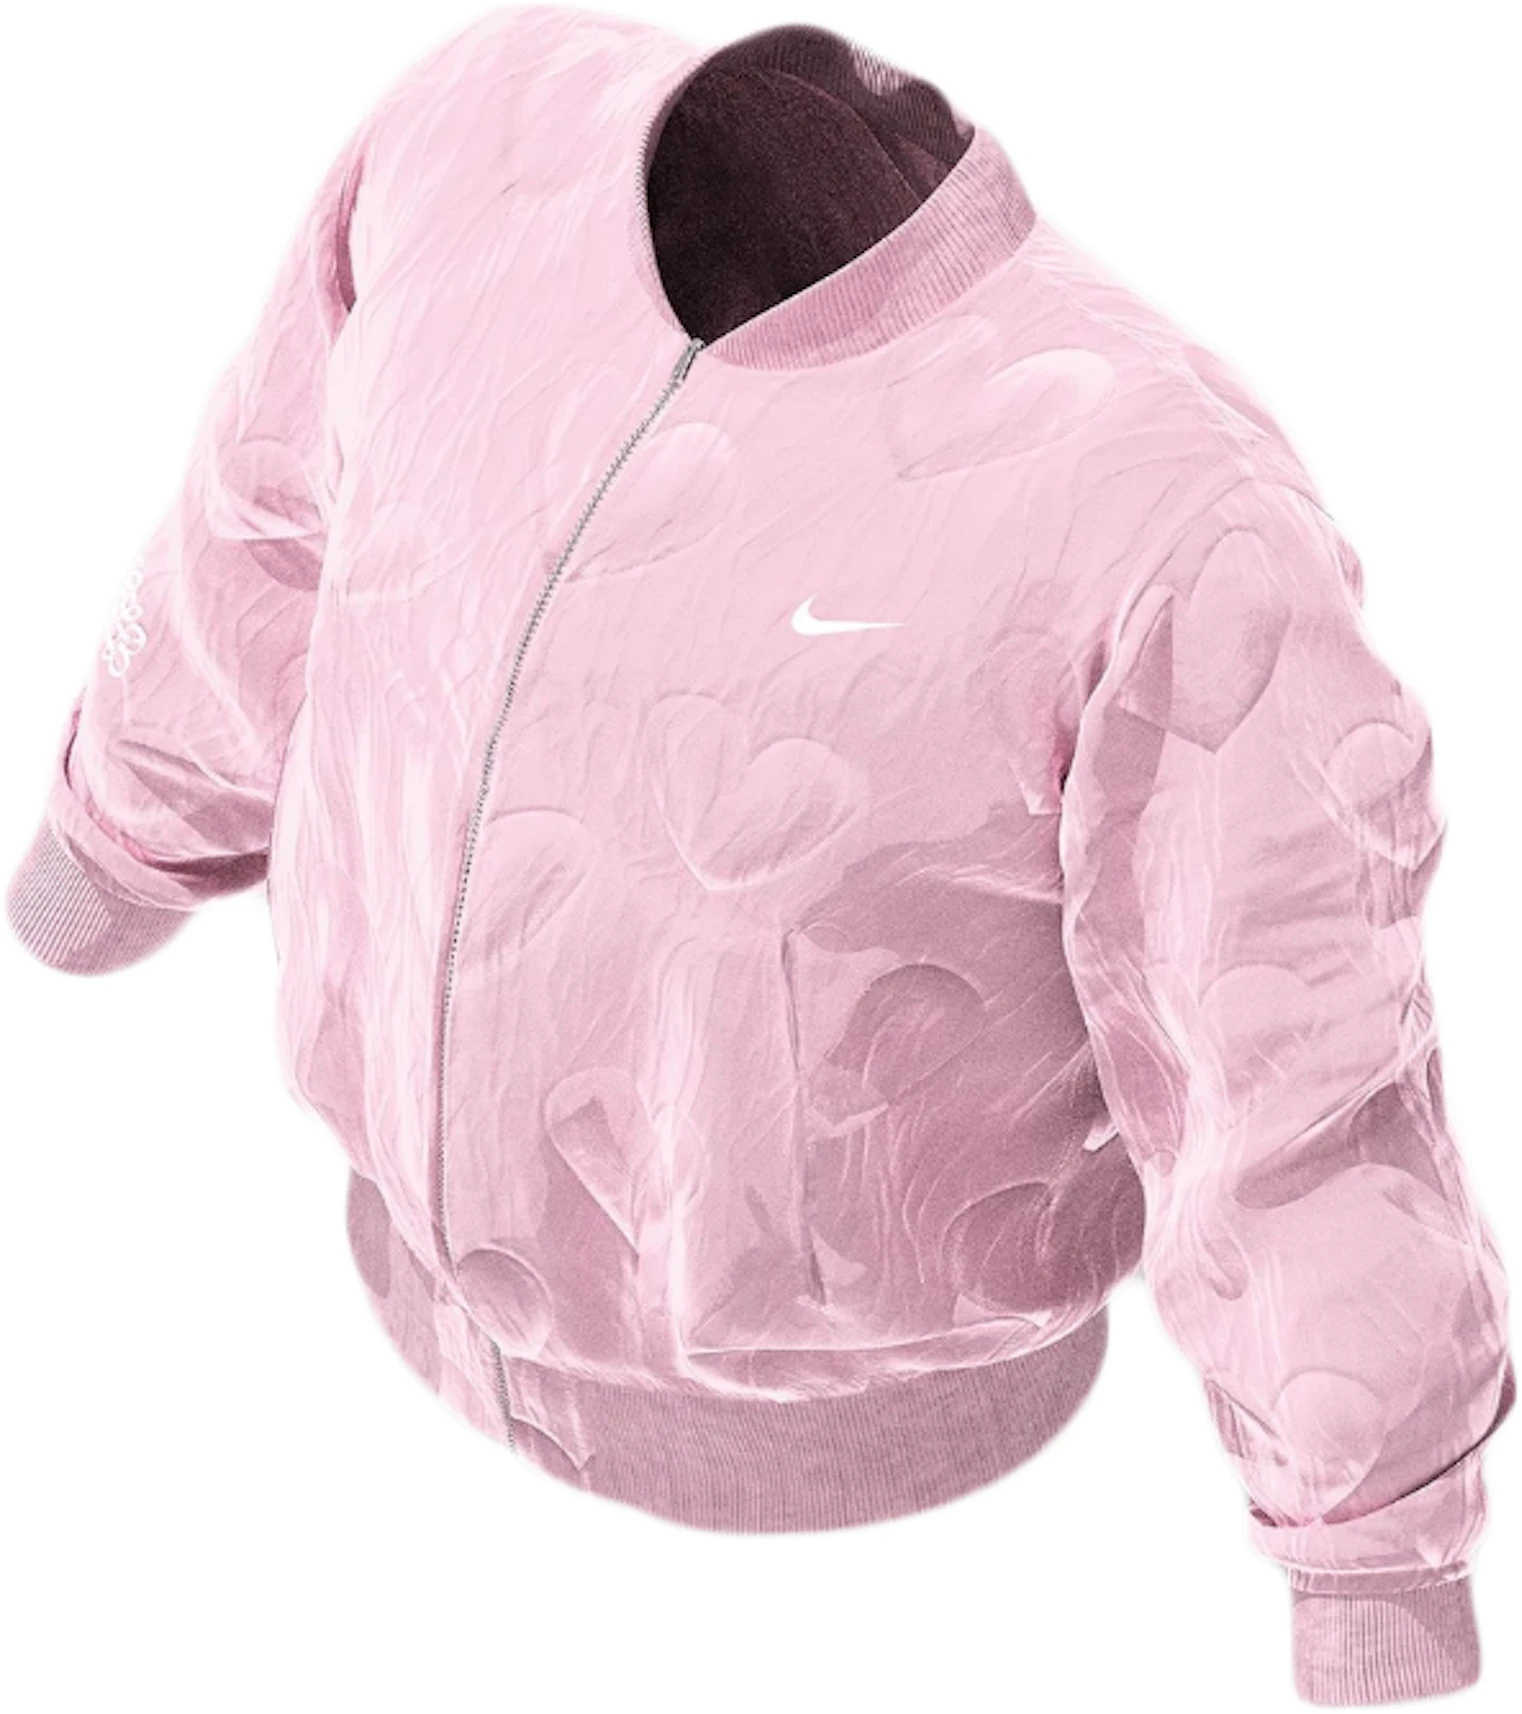 Nike x Drake Certified Lover Boy Bomber Jacket (Friends and Family) Pink -  FW20 - US